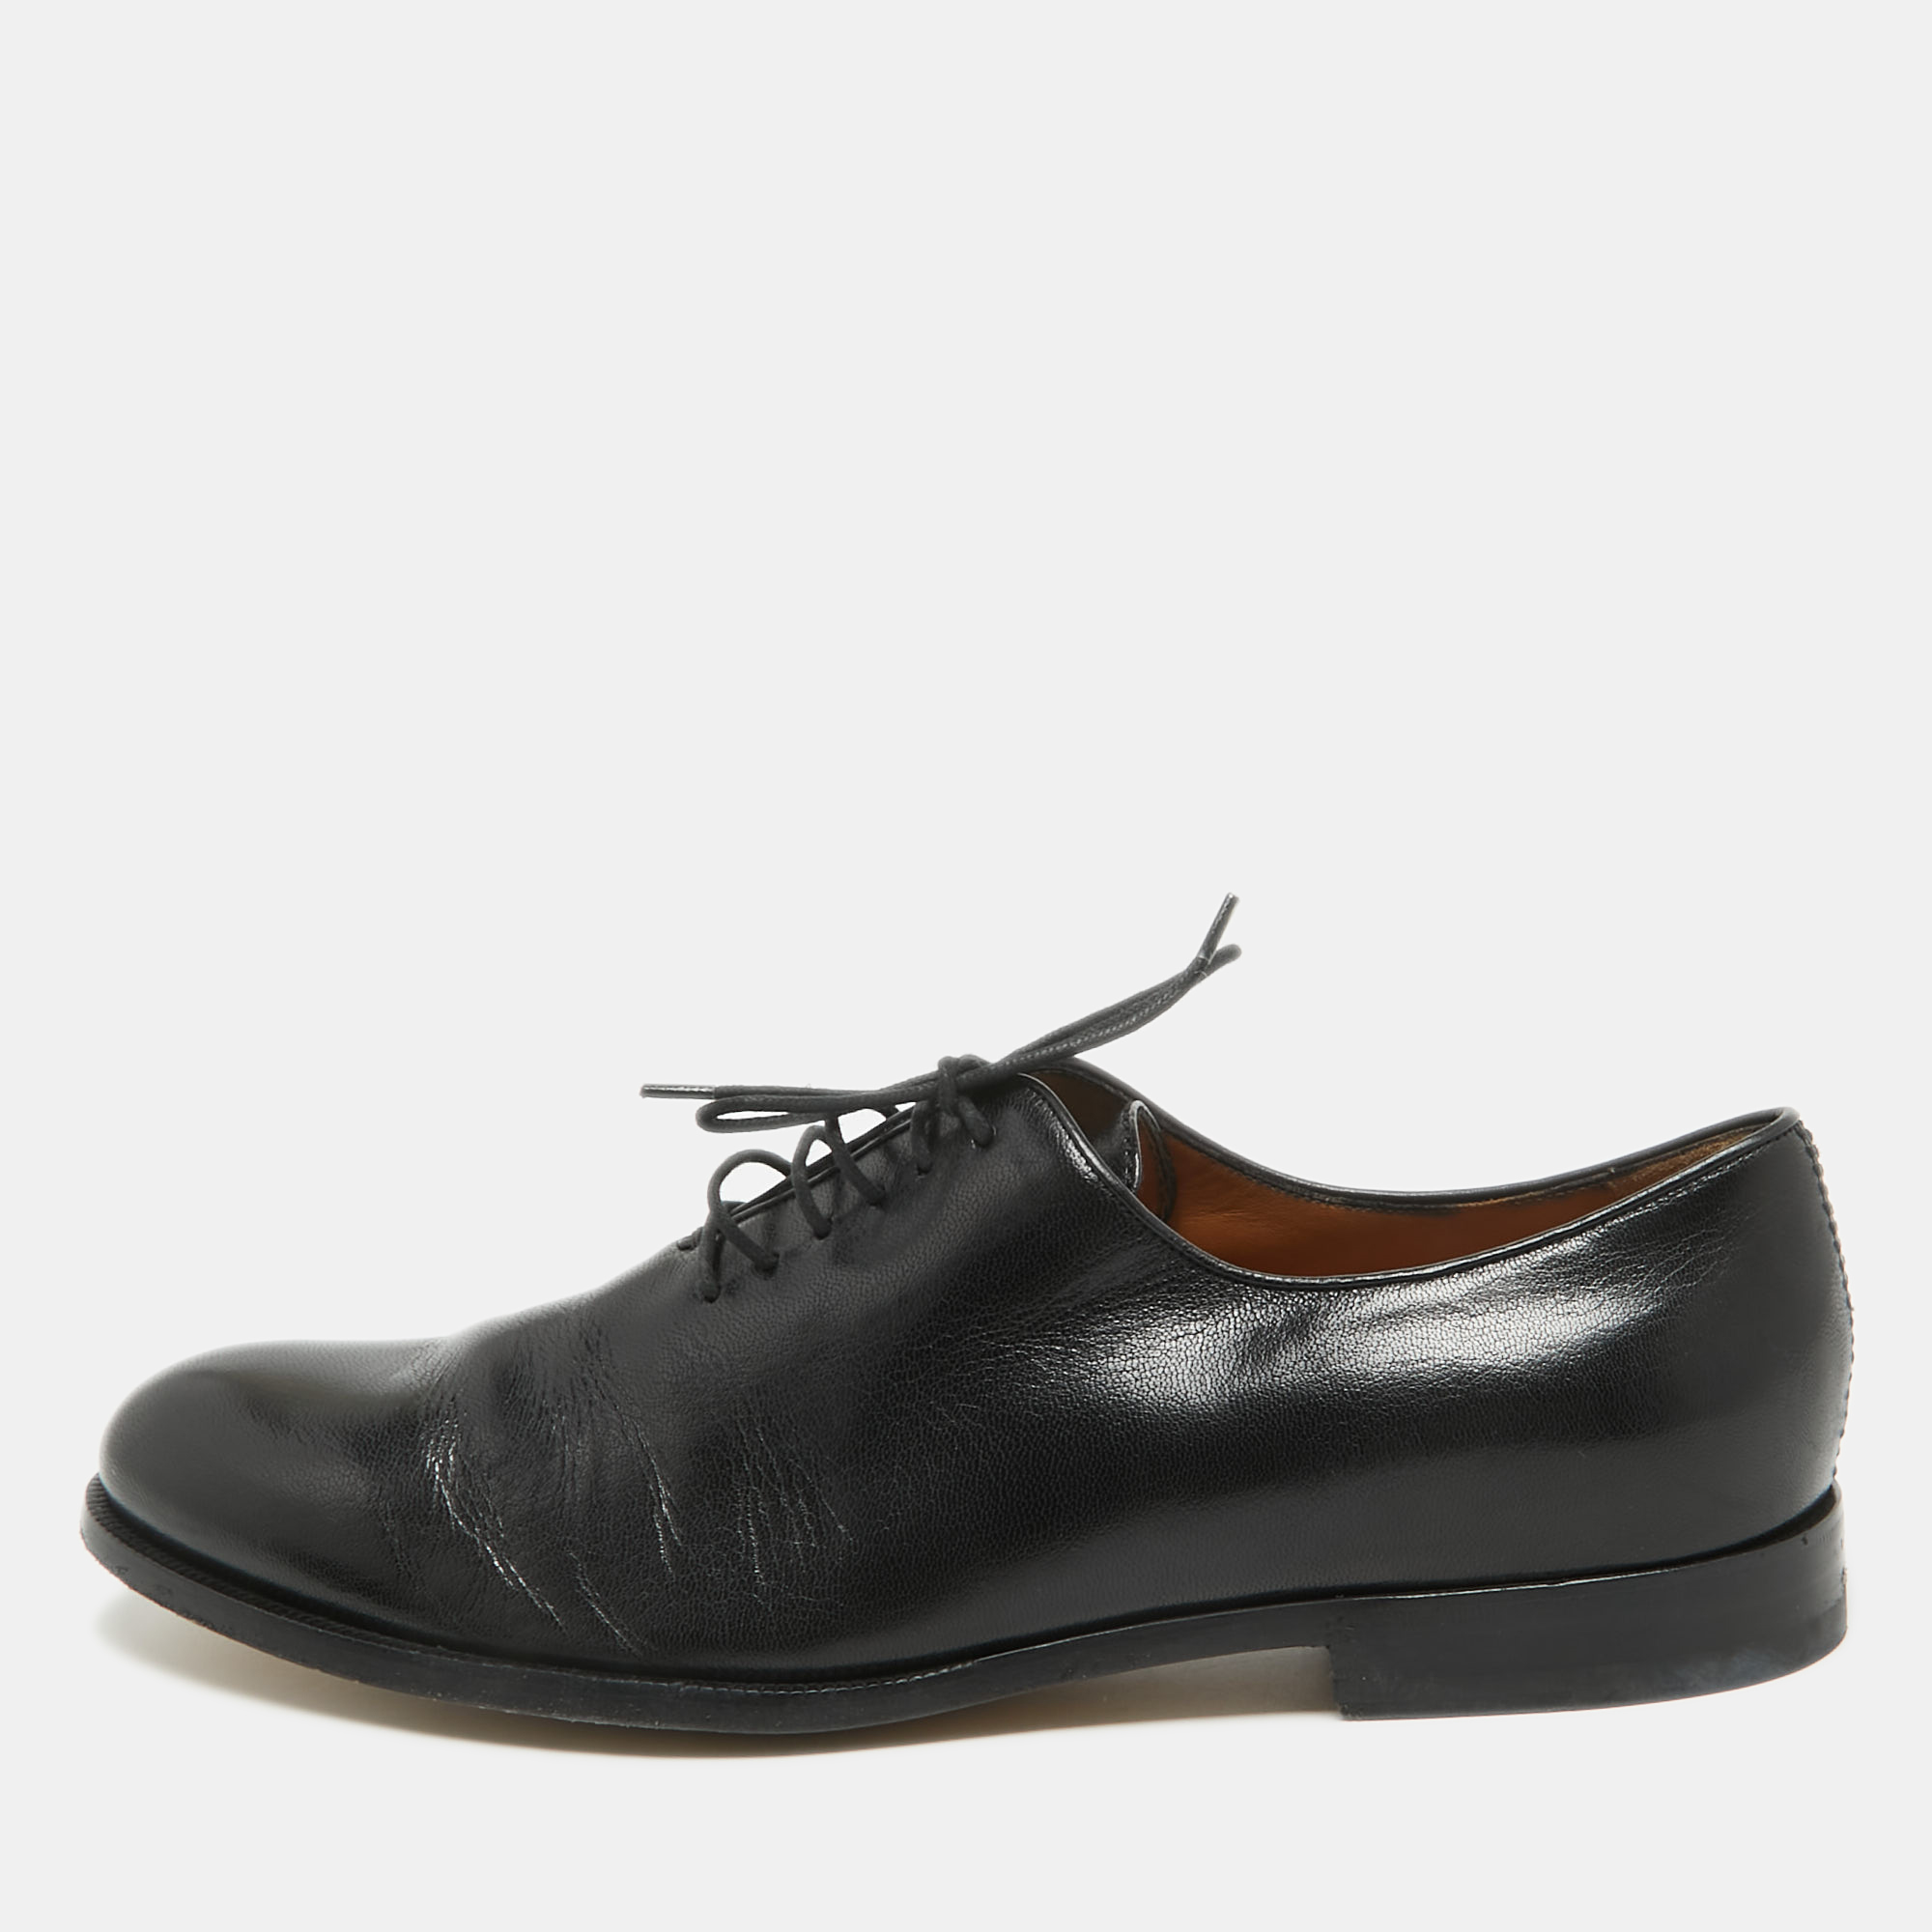 Pre-owned Gucci Black Leather Lace Up Oxfords Size 43